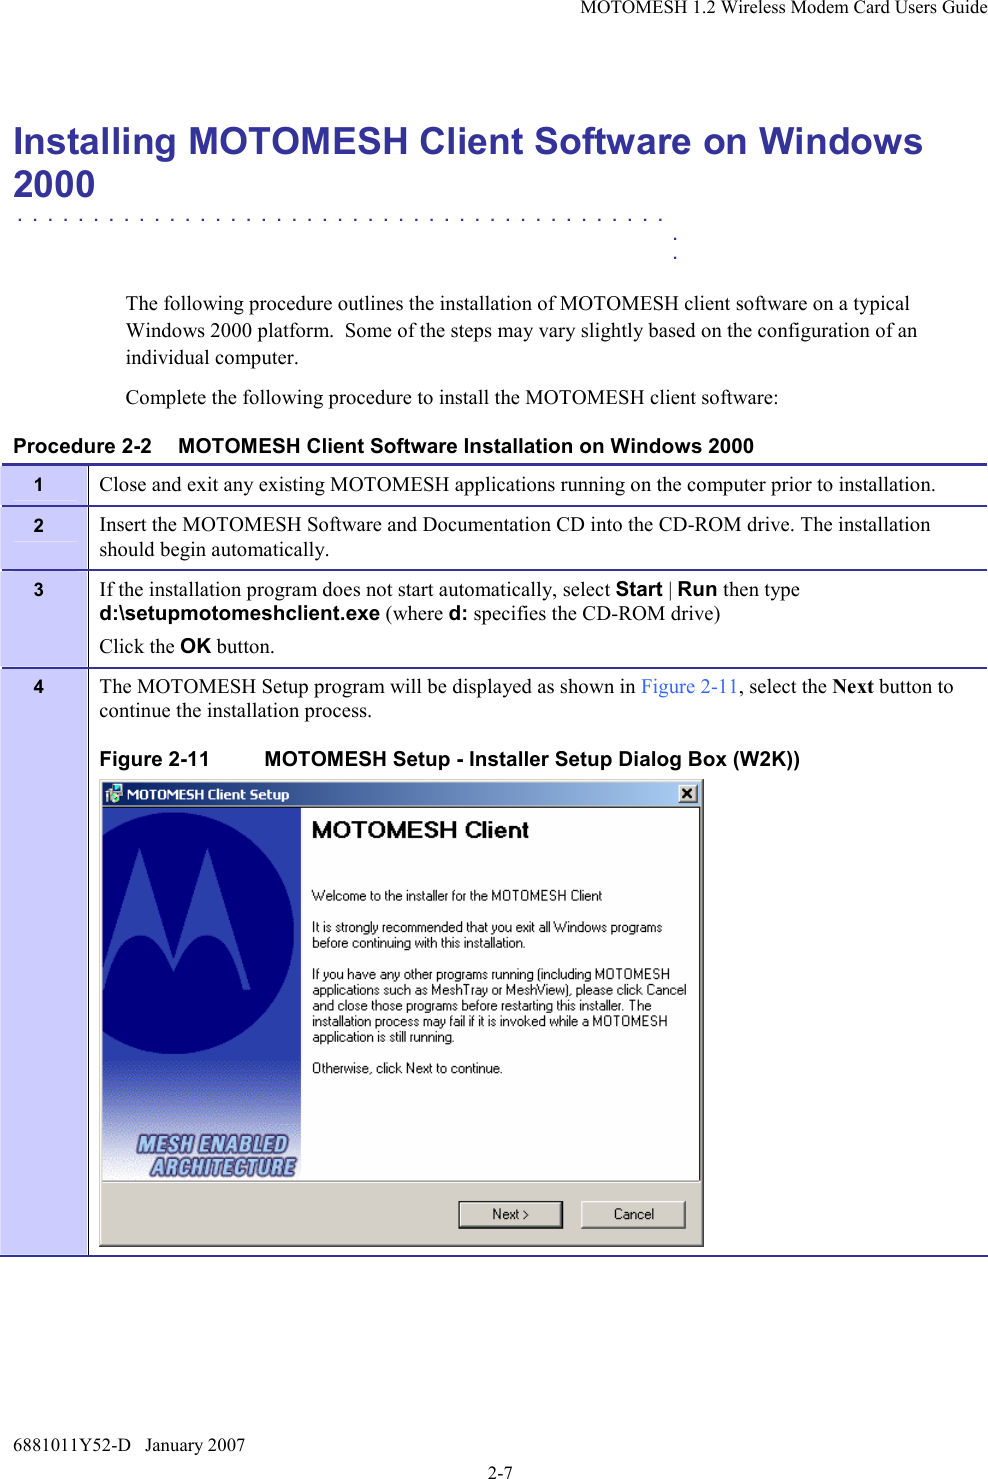 MOTOMESH 1.2 Wireless Modem Card Users Guide 6881011Y52-D   January 2007 2-7  Installing MOTOMESH Client Software on Windows 2000  . . . . . . . . . . . . . . . . . . . . . . . . . . . . . . . . . . . . . . . . . . .    .    .  The following procedure outlines the installation of MOTOMESH client software on a typical Windows 2000 platform.  Some of the steps may vary slightly based on the configuration of an individual computer. Complete the following procedure to install the MOTOMESH client software: Procedure 2-2  MOTOMESH Client Software Installation on Windows 2000 1  Close and exit any existing MOTOMESH applications running on the computer prior to installation. 2  Insert the MOTOMESH Software and Documentation CD into the CD-ROM drive. The installation should begin automatically. 3  If the installation program does not start automatically, select Start | Run then type d:\setupmotomeshclient.exe (where d: specifies the CD-ROM drive)   Click the OK button. 4  The MOTOMESH Setup program will be displayed as shown in Figure 2-11, select the Next button to continue the installation process. Figure 2-11  MOTOMESH Setup - Installer Setup Dialog Box (W2K))  